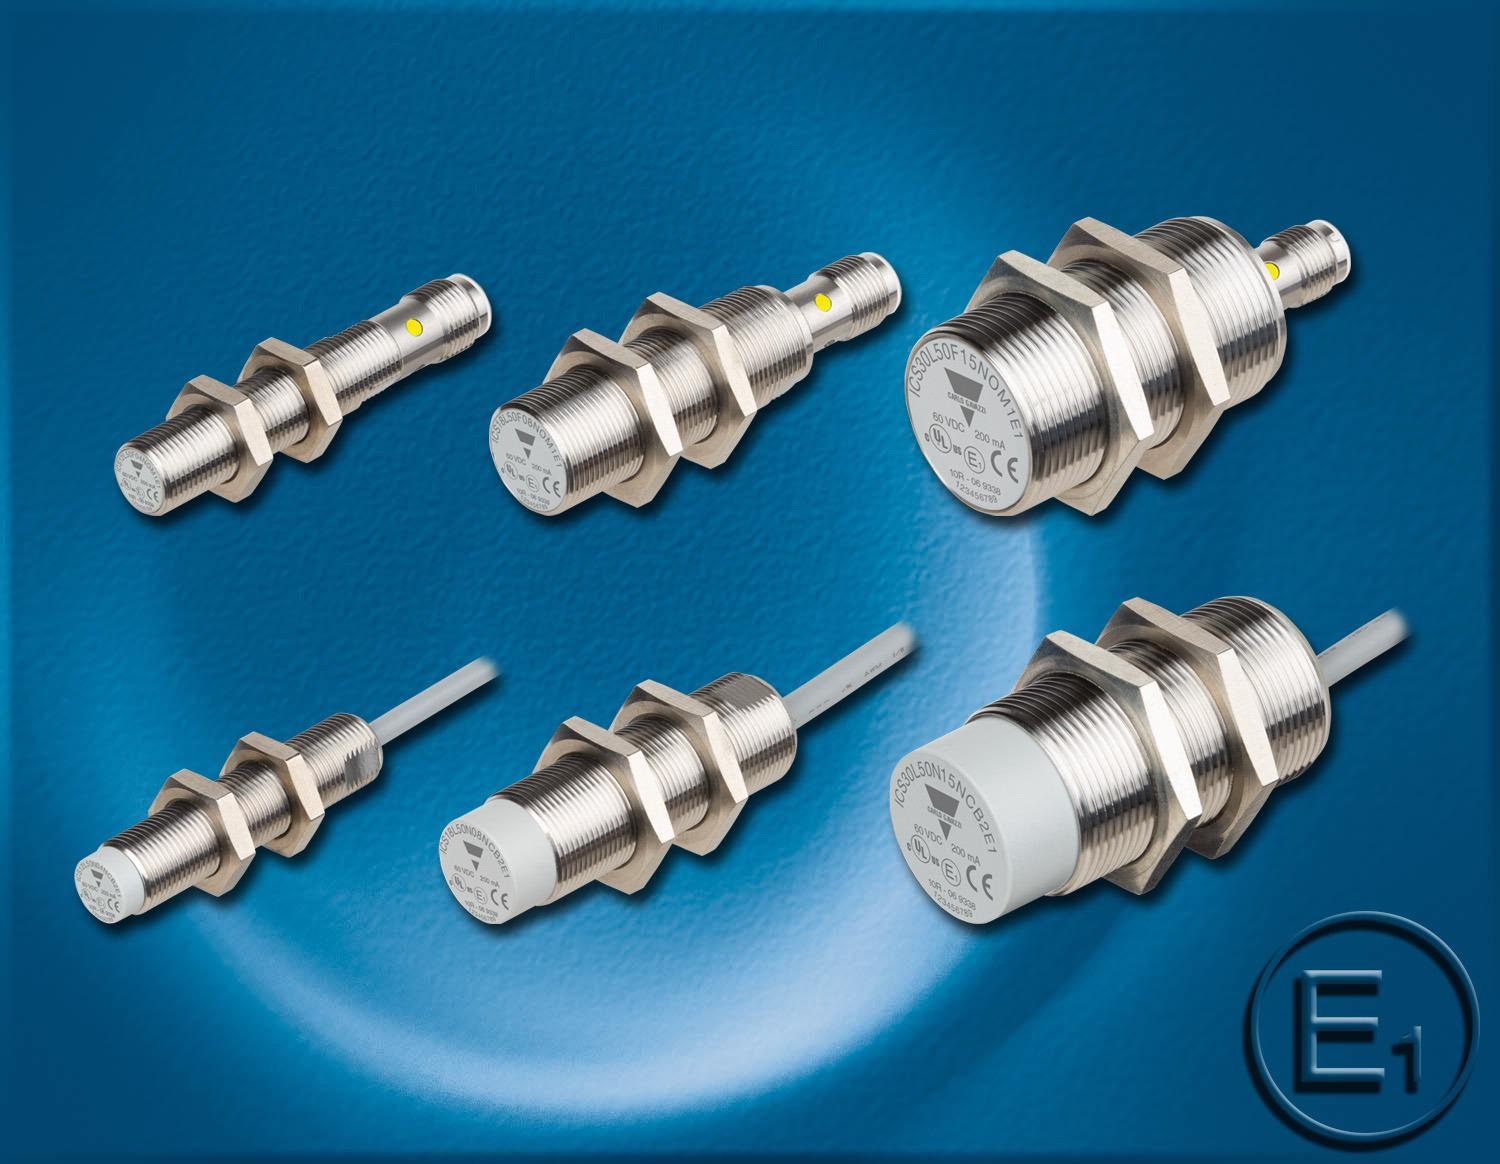 E1-Rated Inductive Proximity Sensors Designed for Mobile Equipment